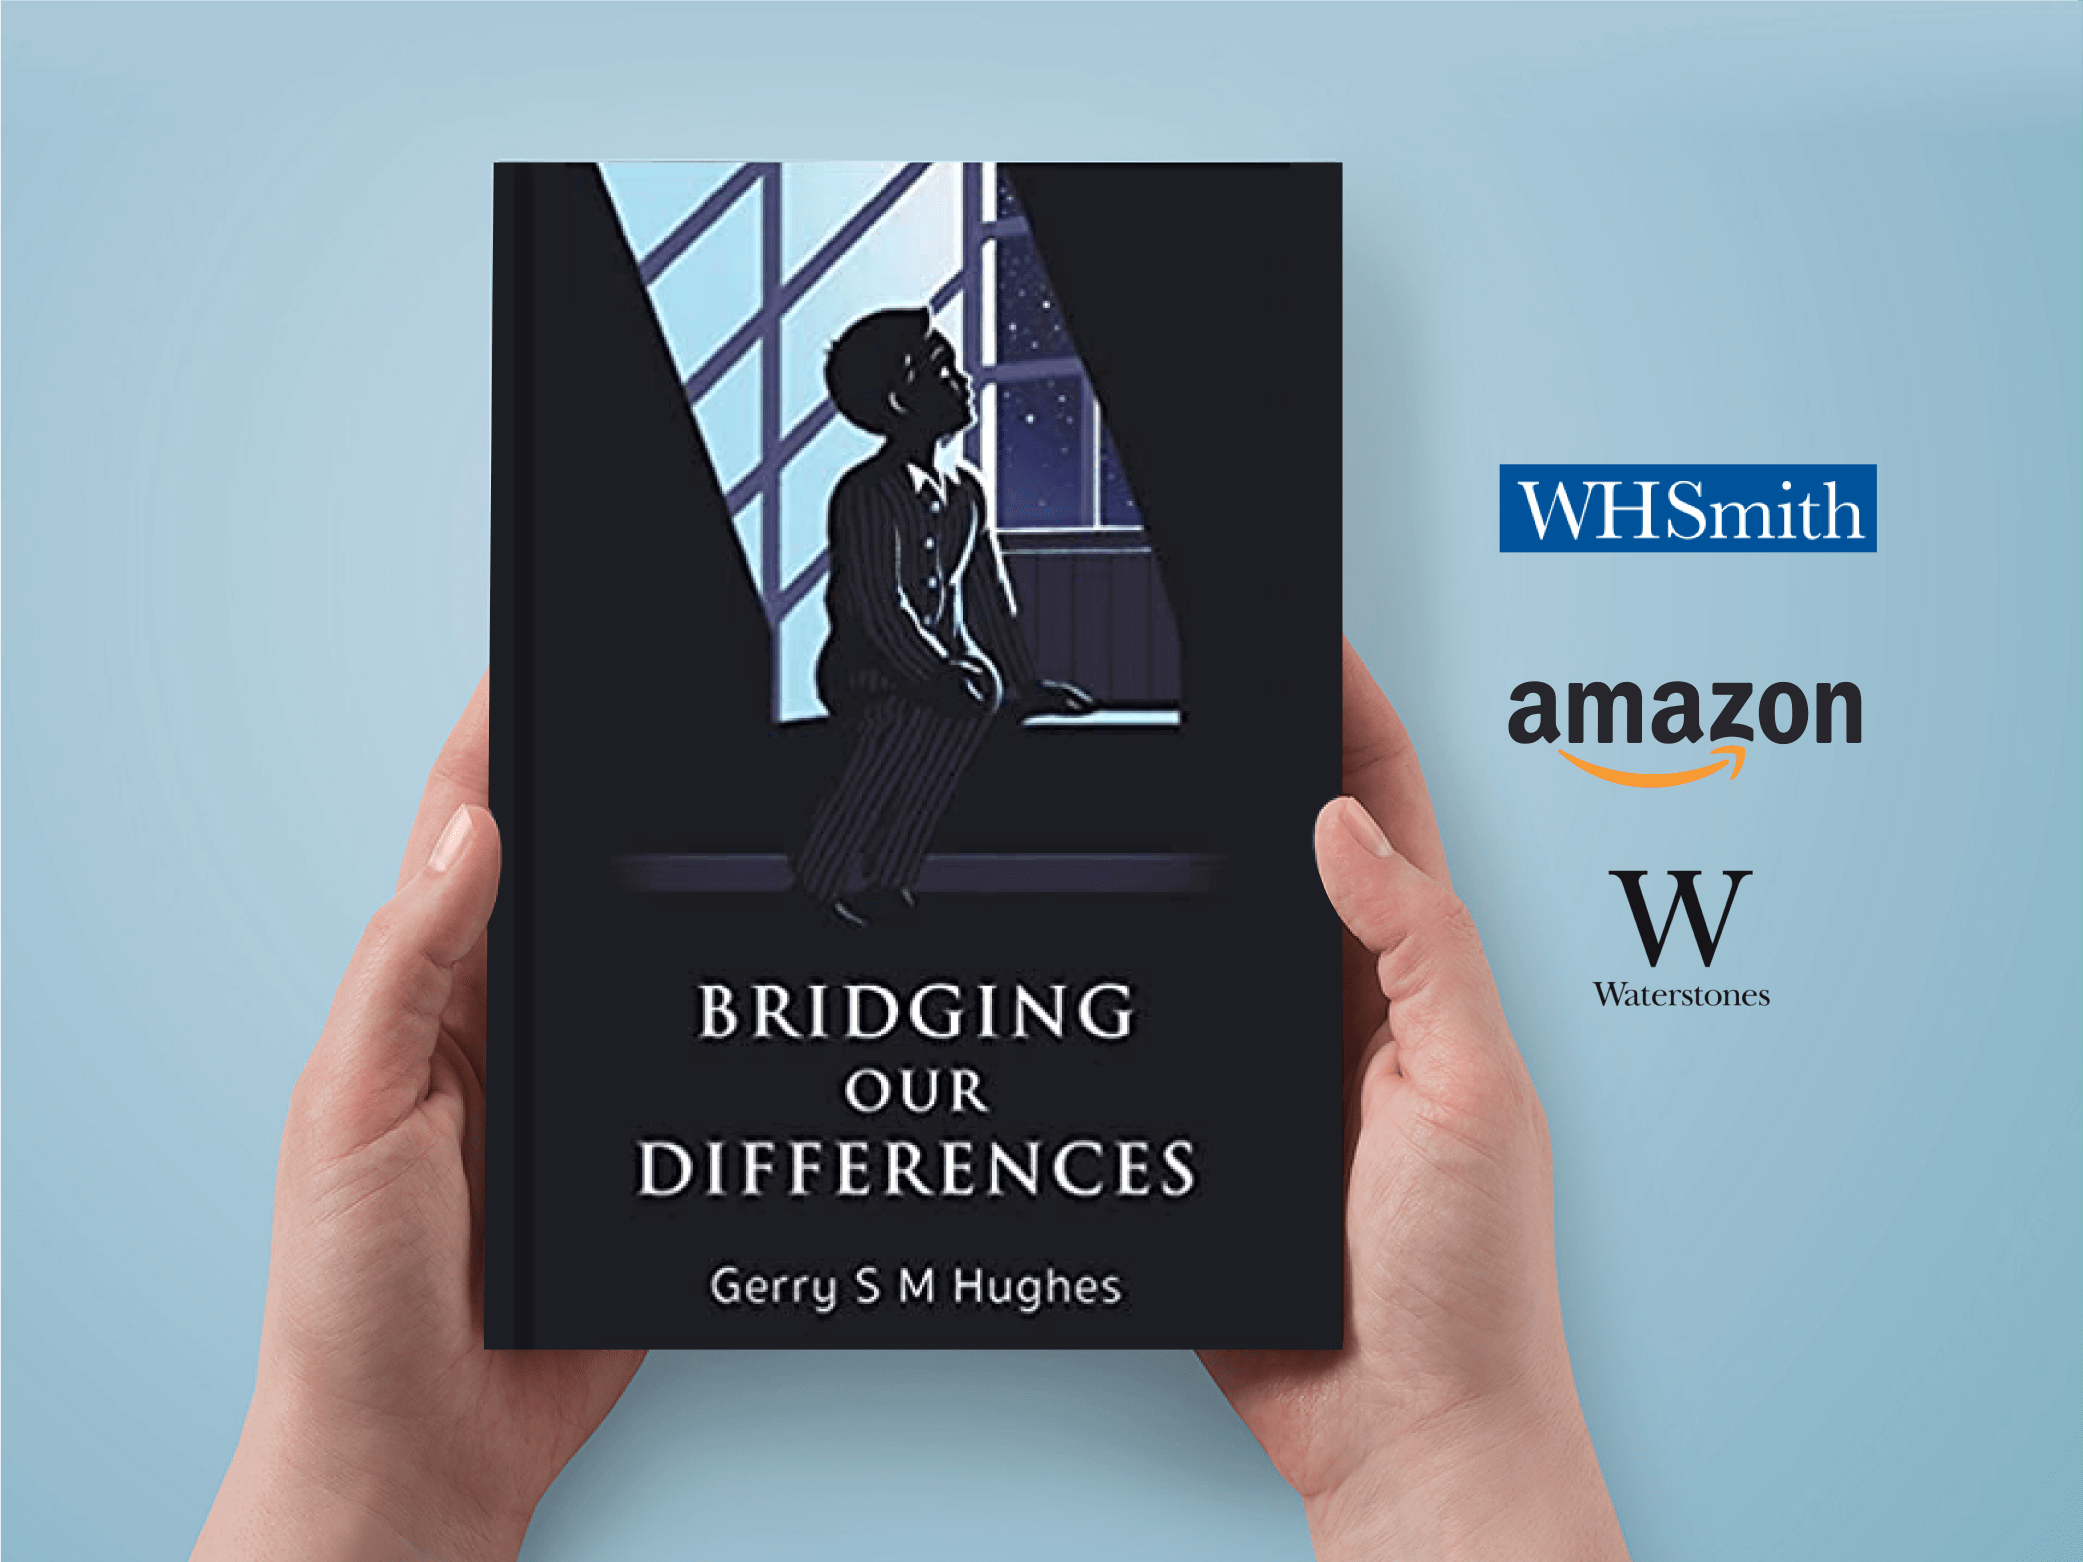 Bridging Our Differences - the book by Gerry S M Hughes